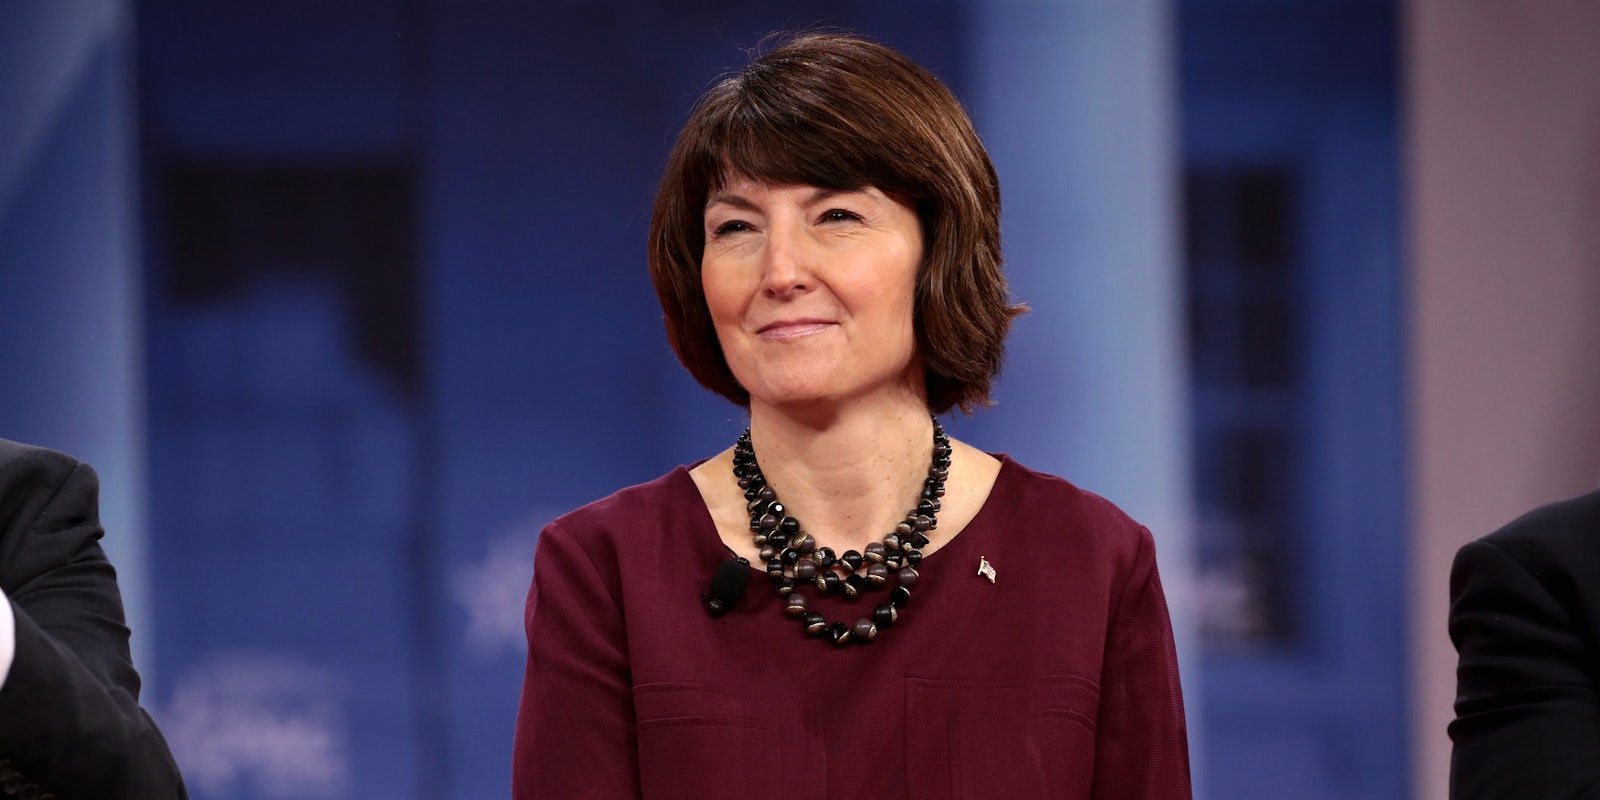 Cathy McMorris Rodgers Section 230 memo